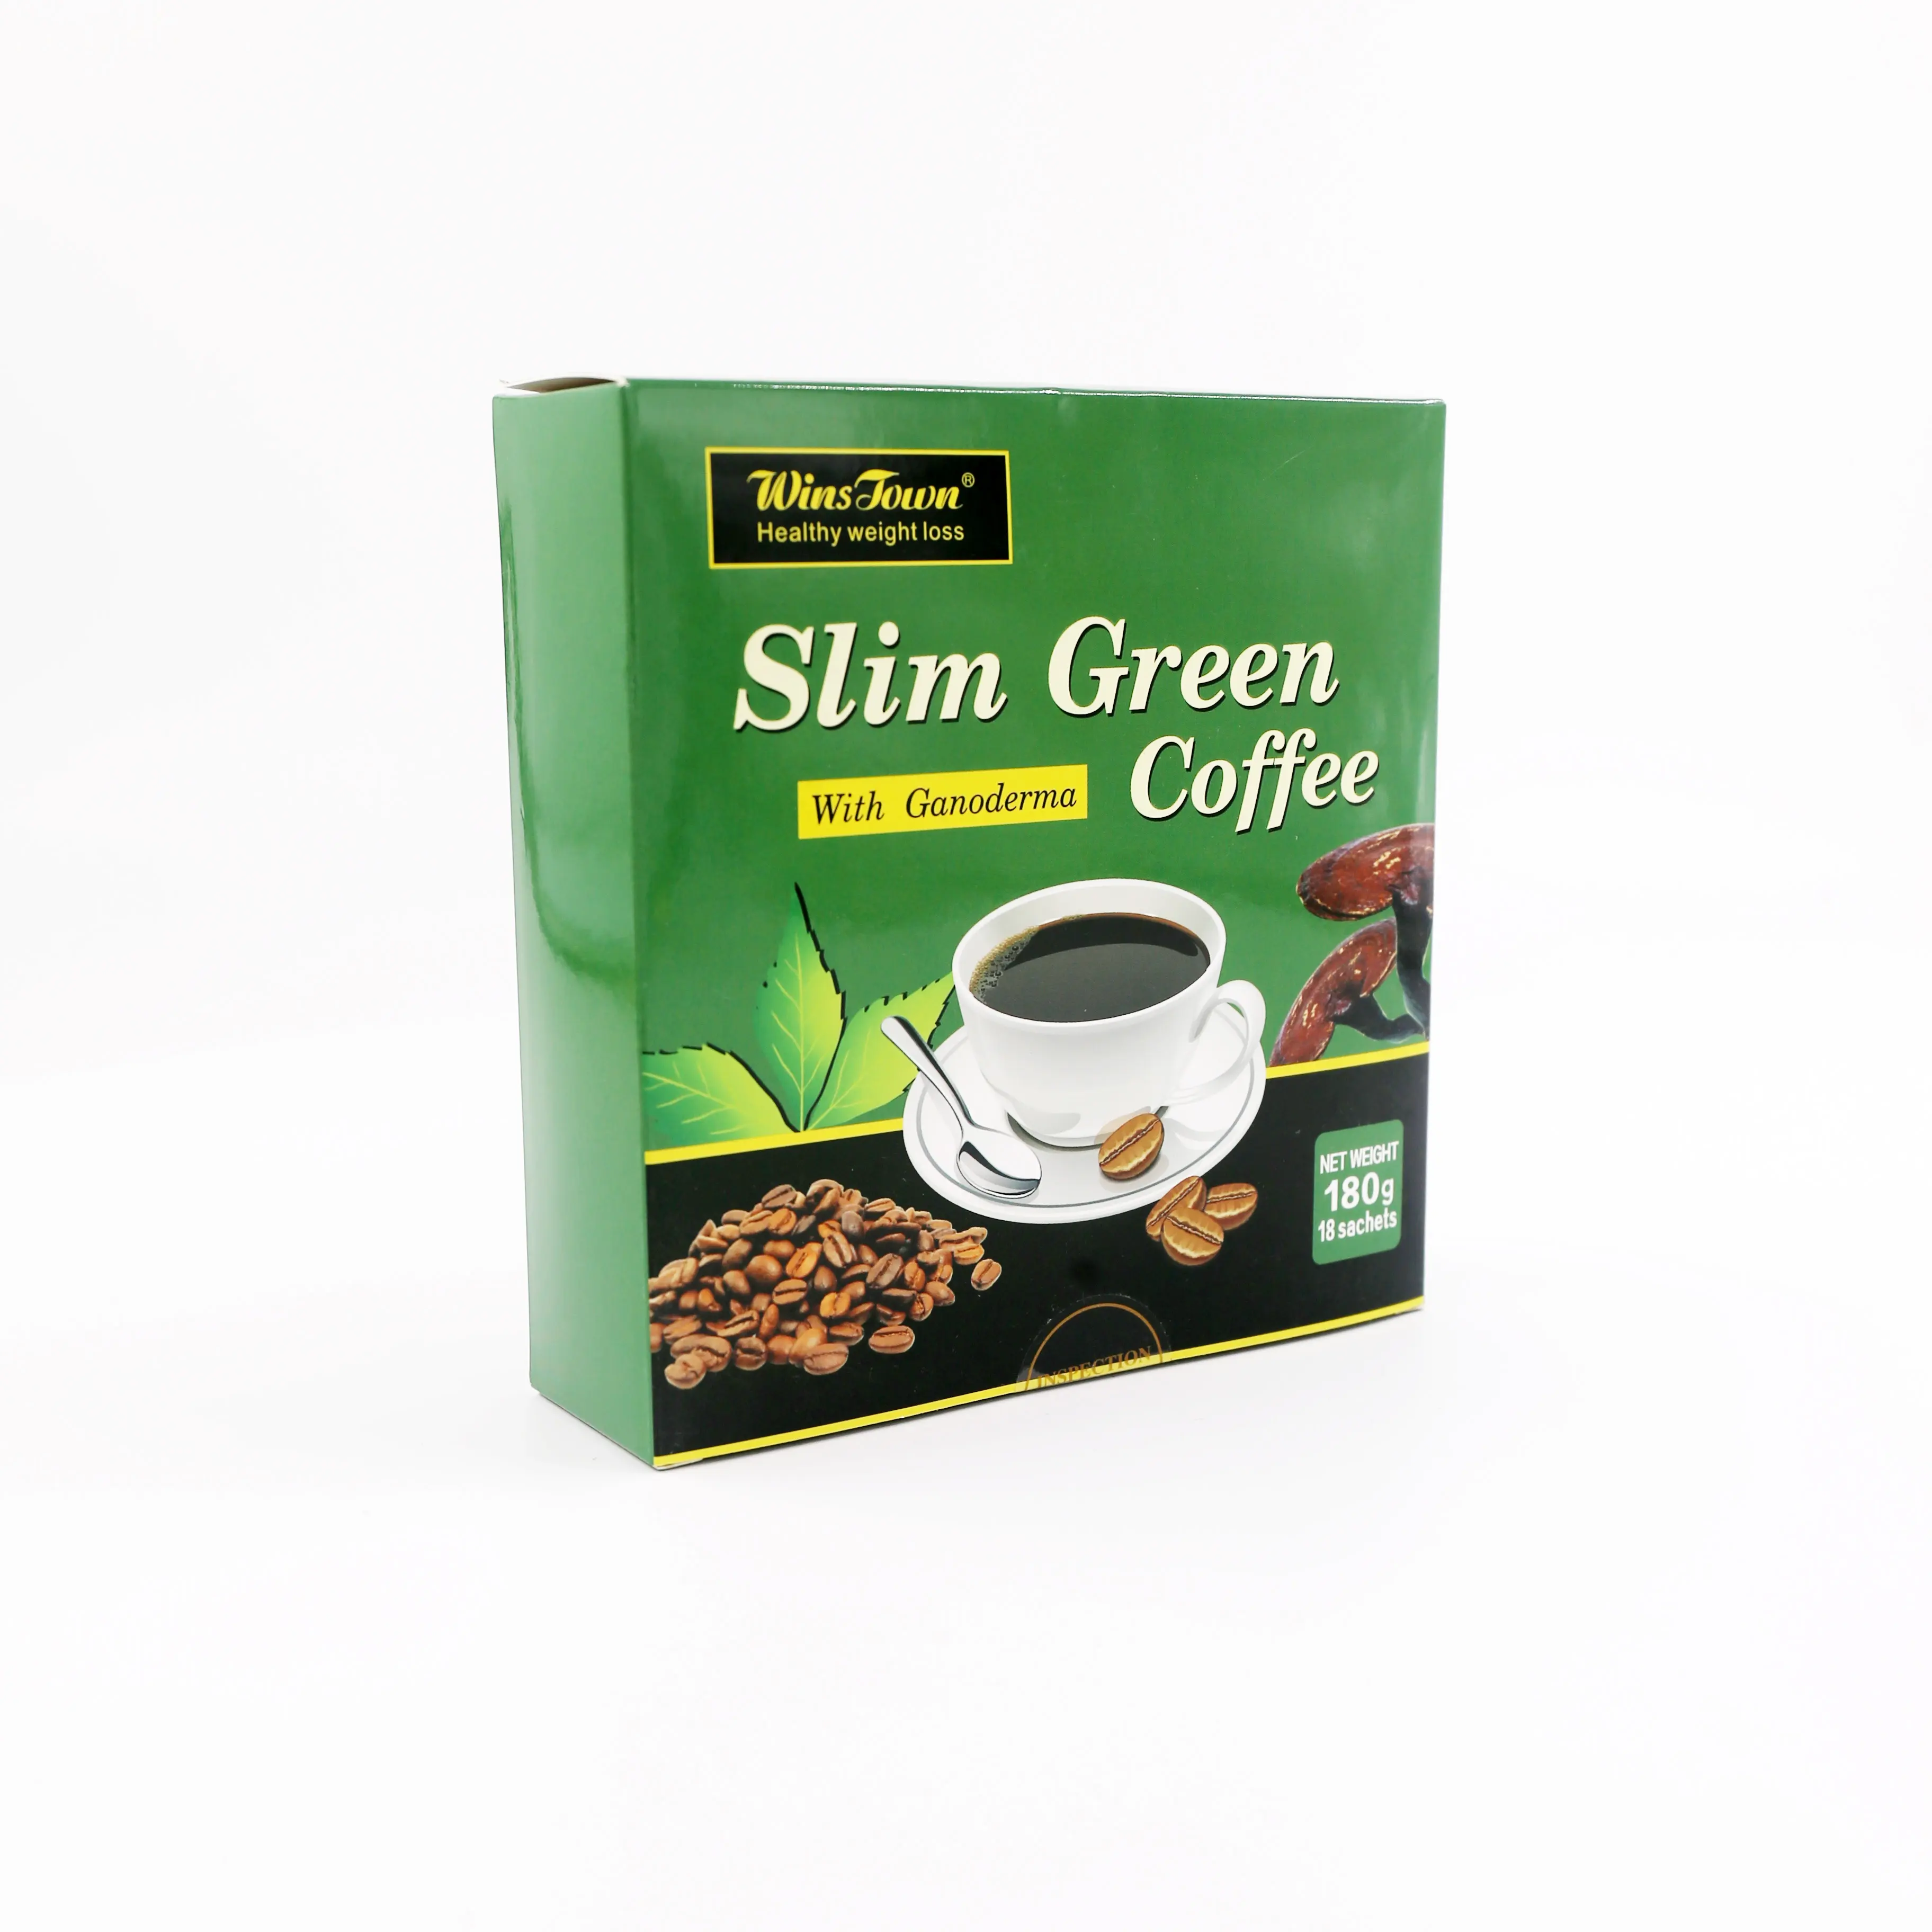 WinsTown natural healthy weight loss slim green coffee with ganoderma slimming Instant coffee